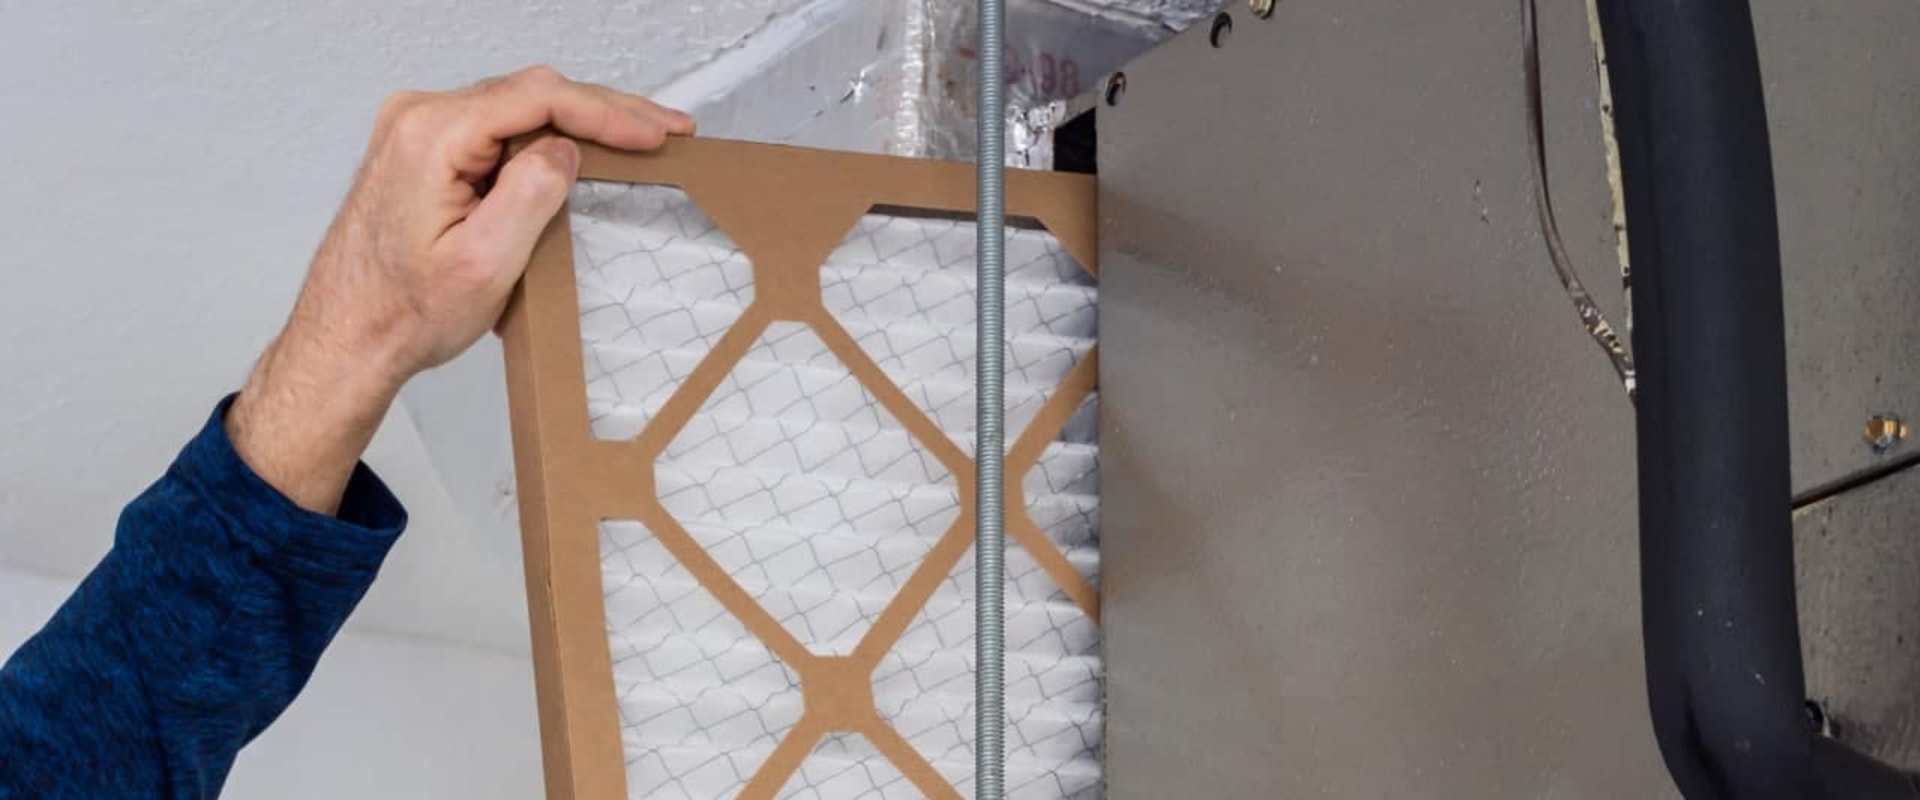 The Ultimate Guide to Choosing the Perfect Furnace Filter